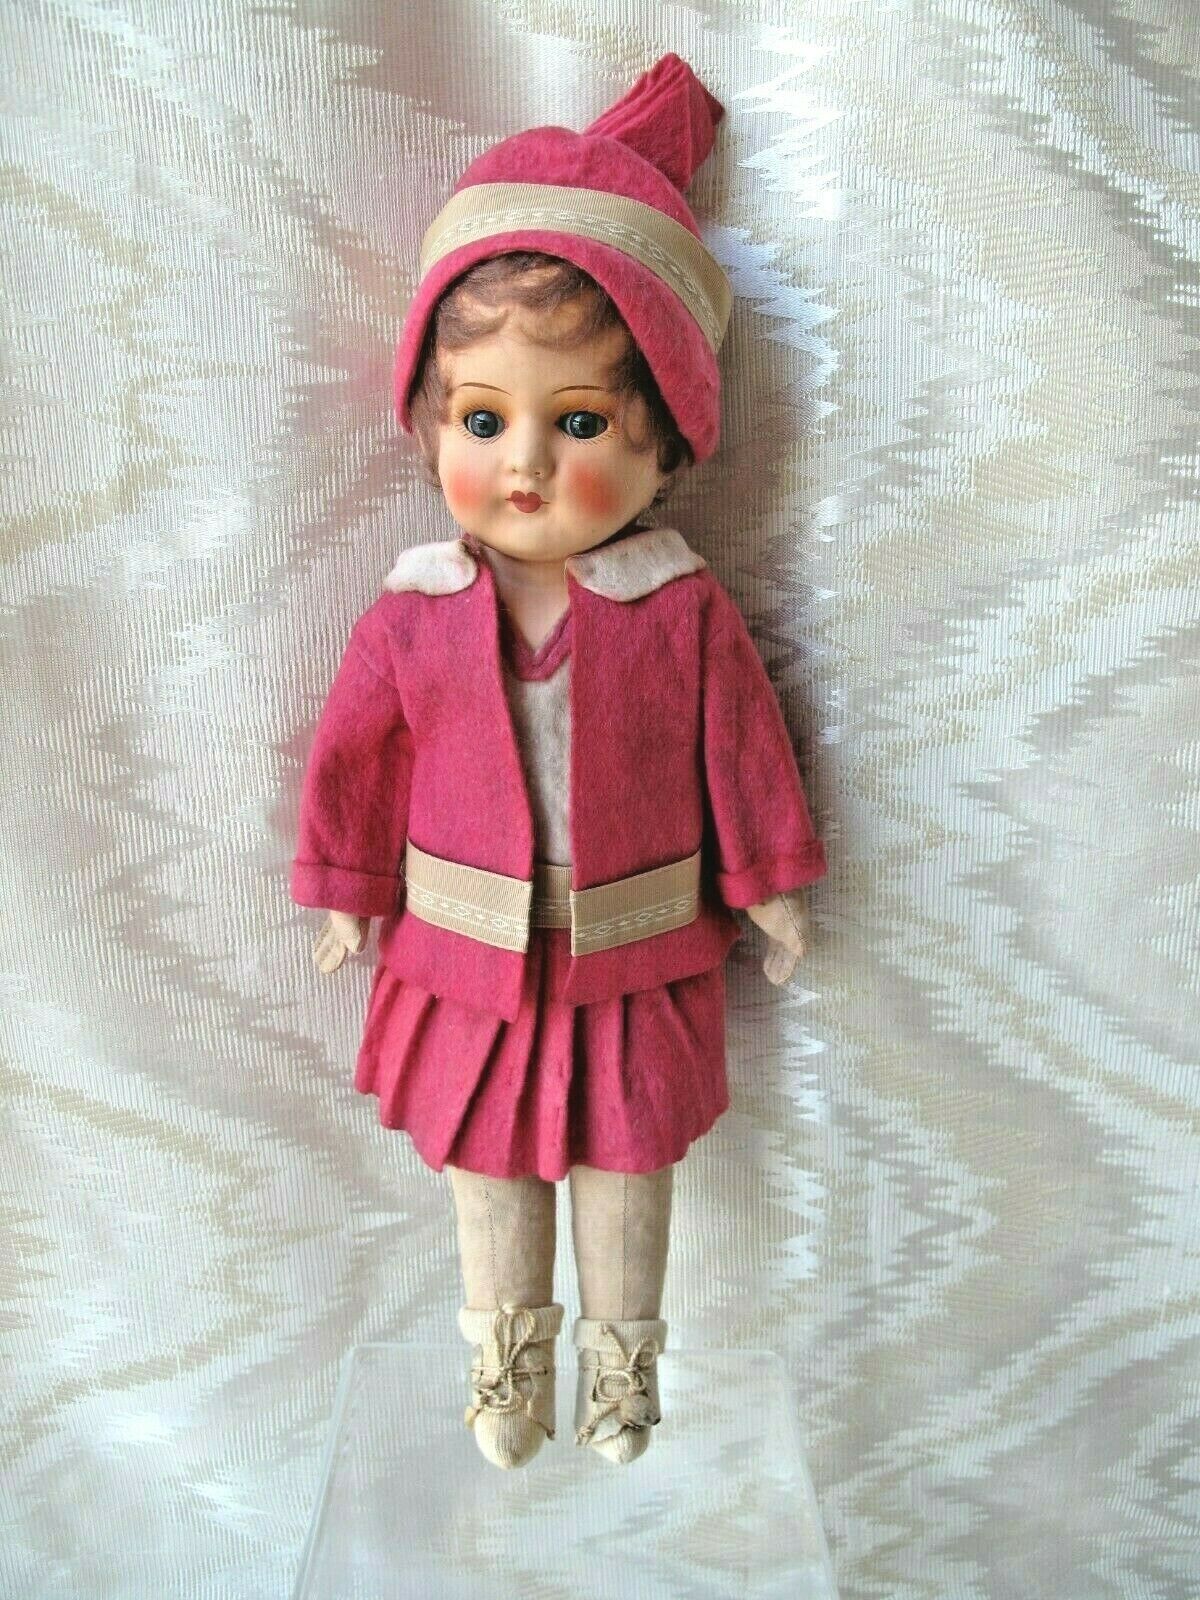 Perky 16" Flapper Doll, Celluoid & Cloth, Vintage 1920-30